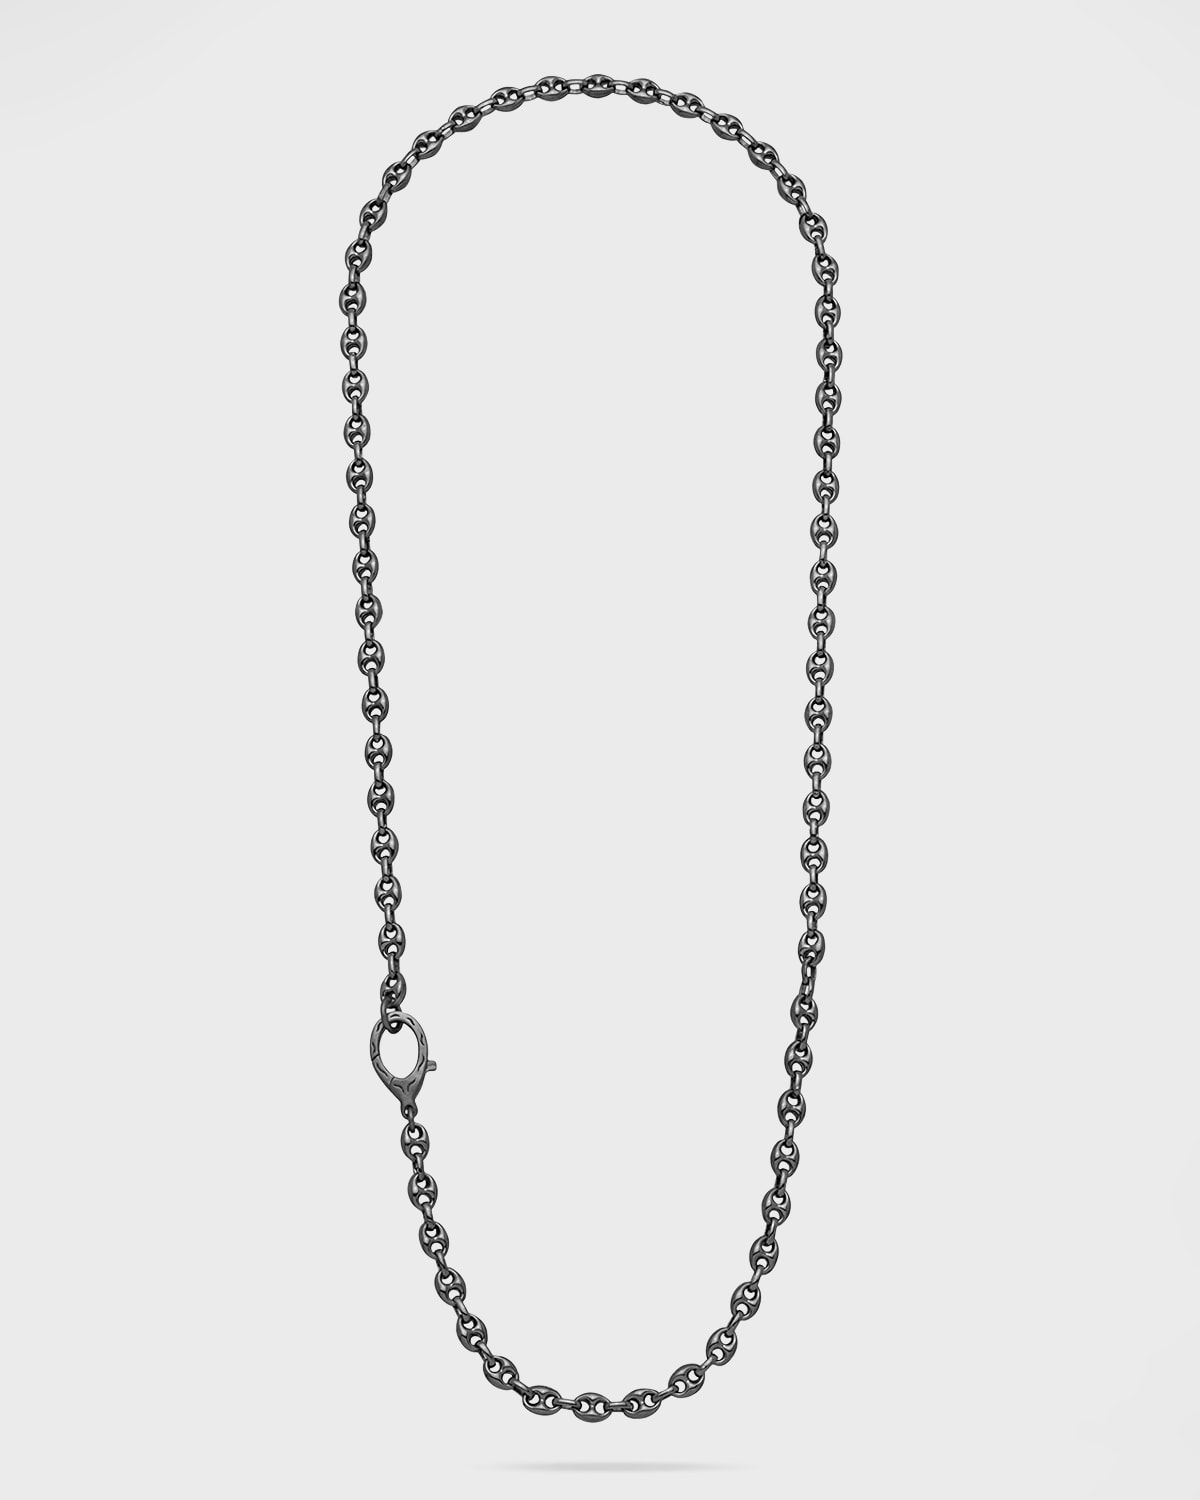 Marco Dal Maso Marine Burnished and Polished Silver Necklace, 24"L